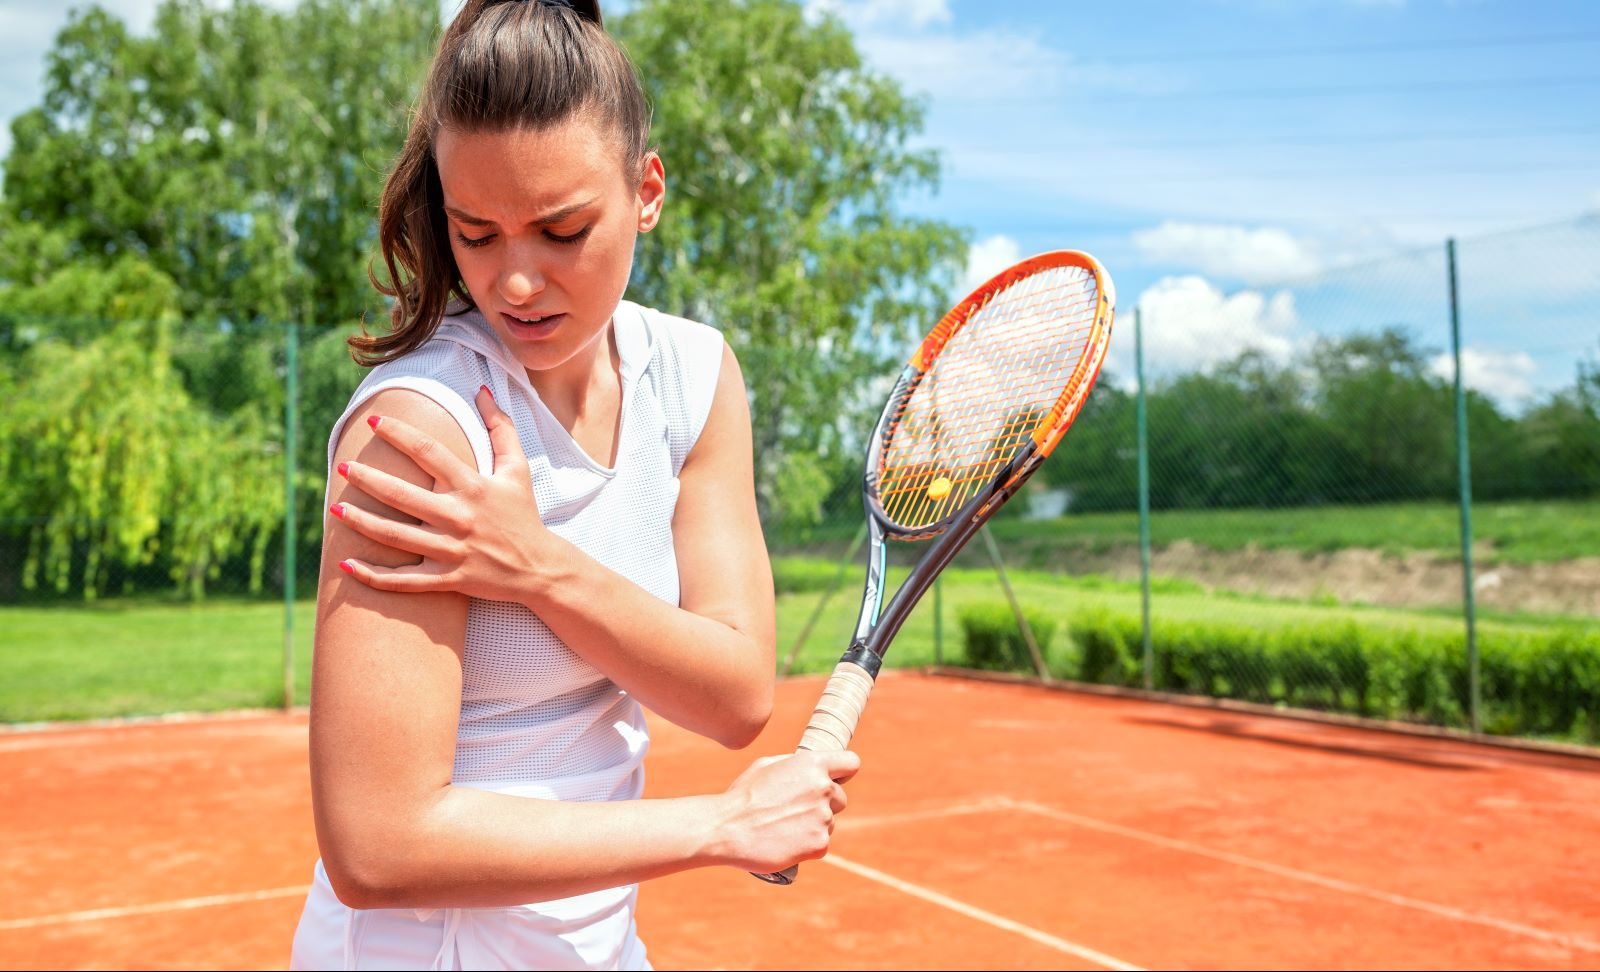 How to Deal with Common Summer Sports Injuries